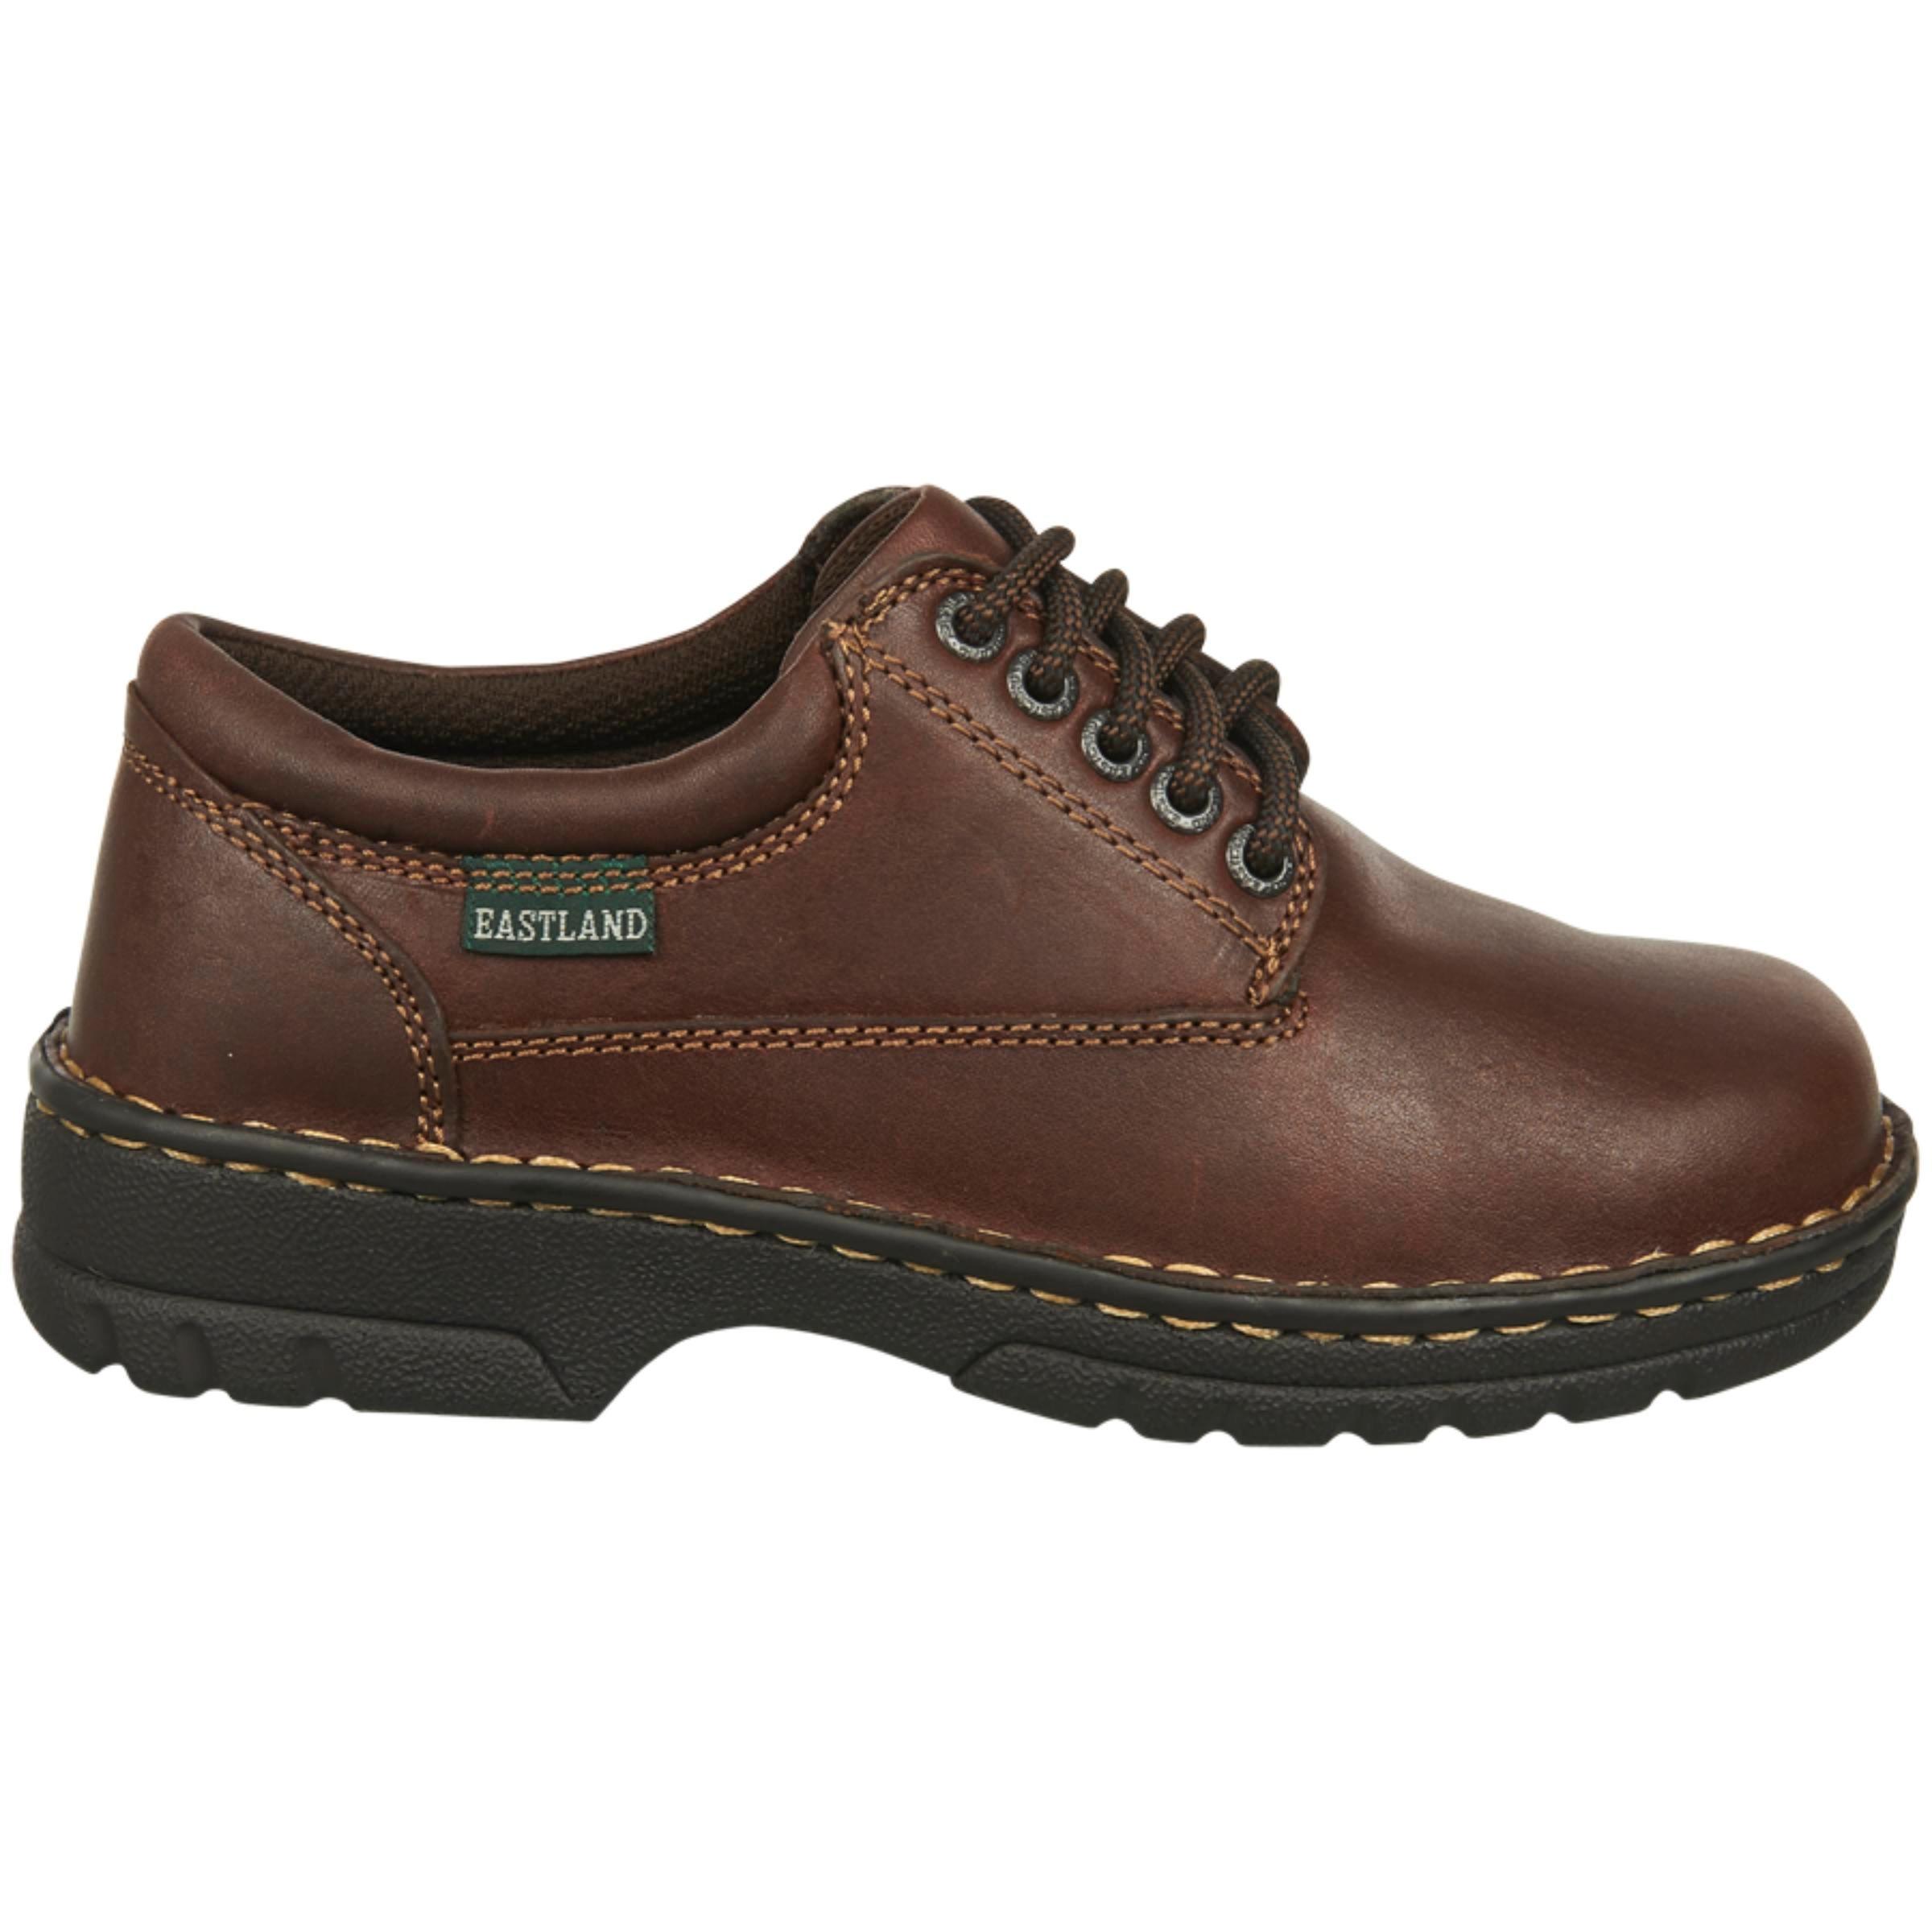 Eastland Leather Plainview Medium/wide Oxford Shoes in Brown - Lyst